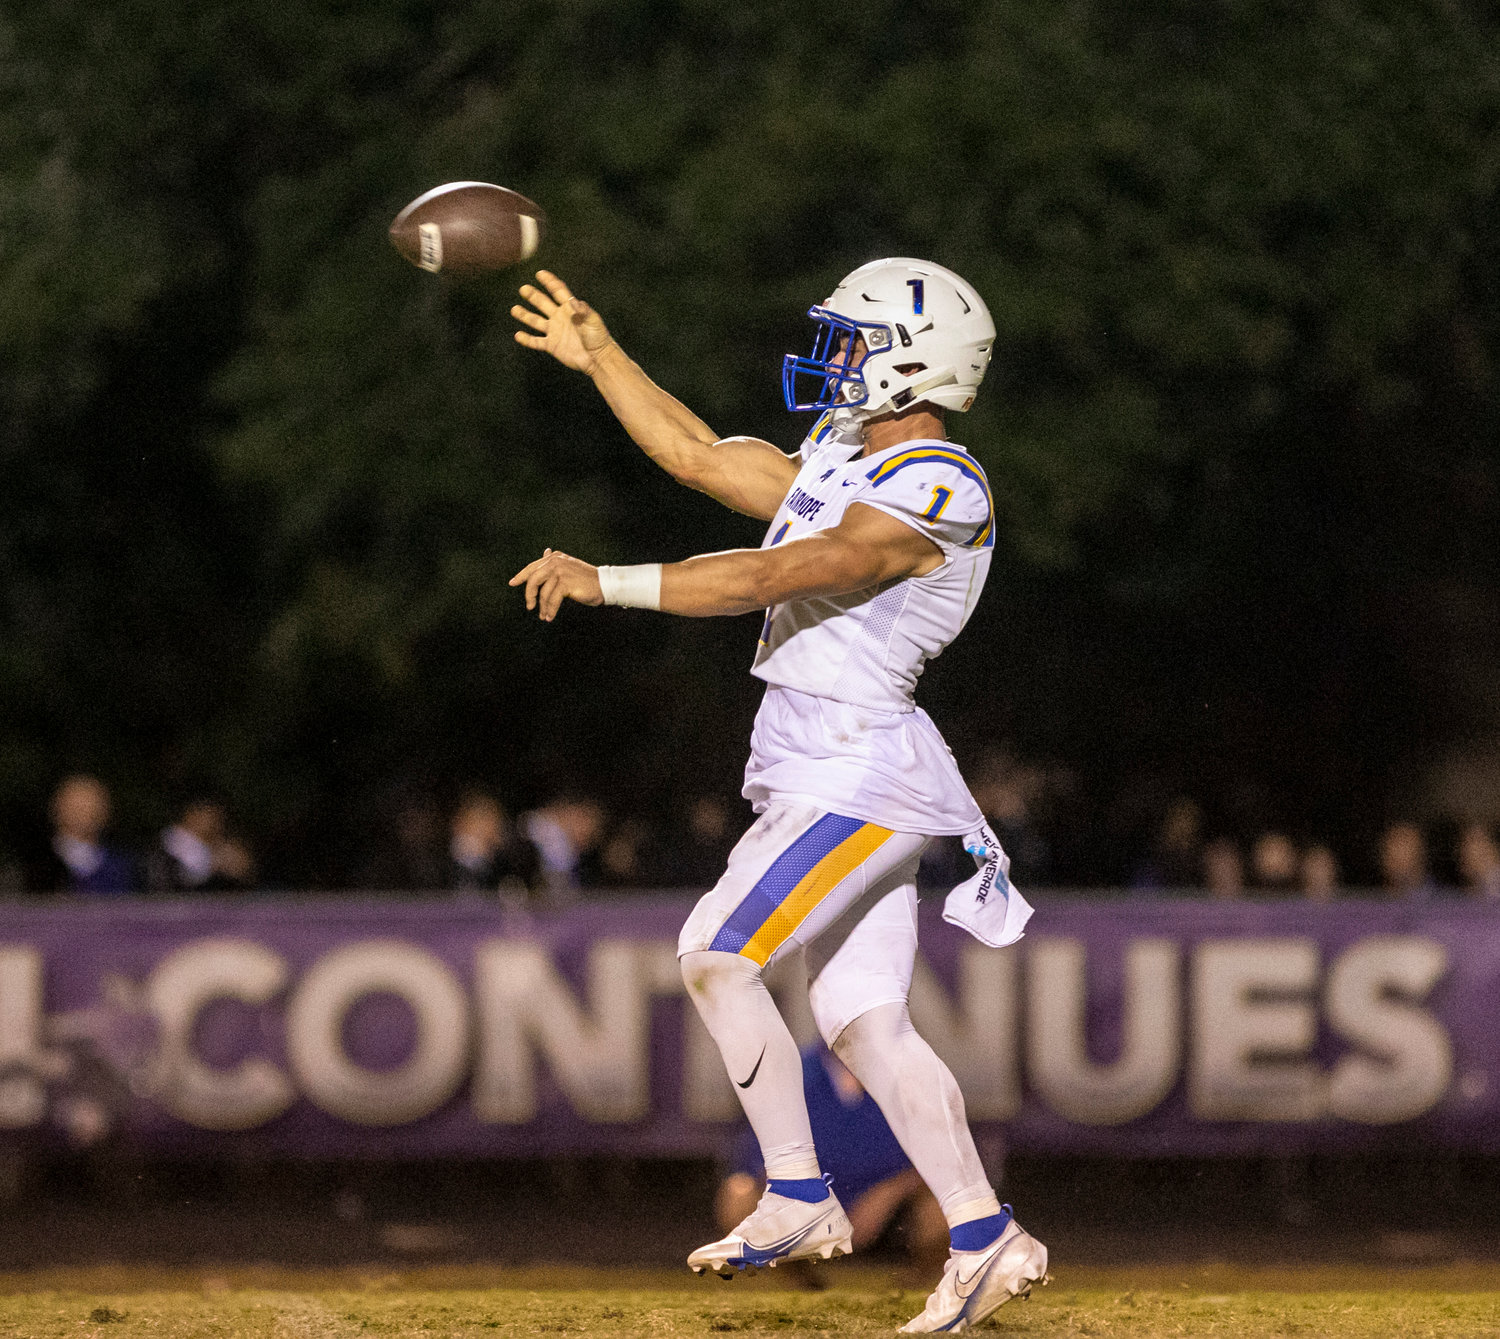 Fairhope quarterback Caden Creel releases a throw during the Pirates’ Class 7A Region 1 contest against the Daphne Trojans at Jubilee Stadium Oct. 7. Creel was recently named as Fairhope’s 30th representative selected to the AHSAA All-Star game.